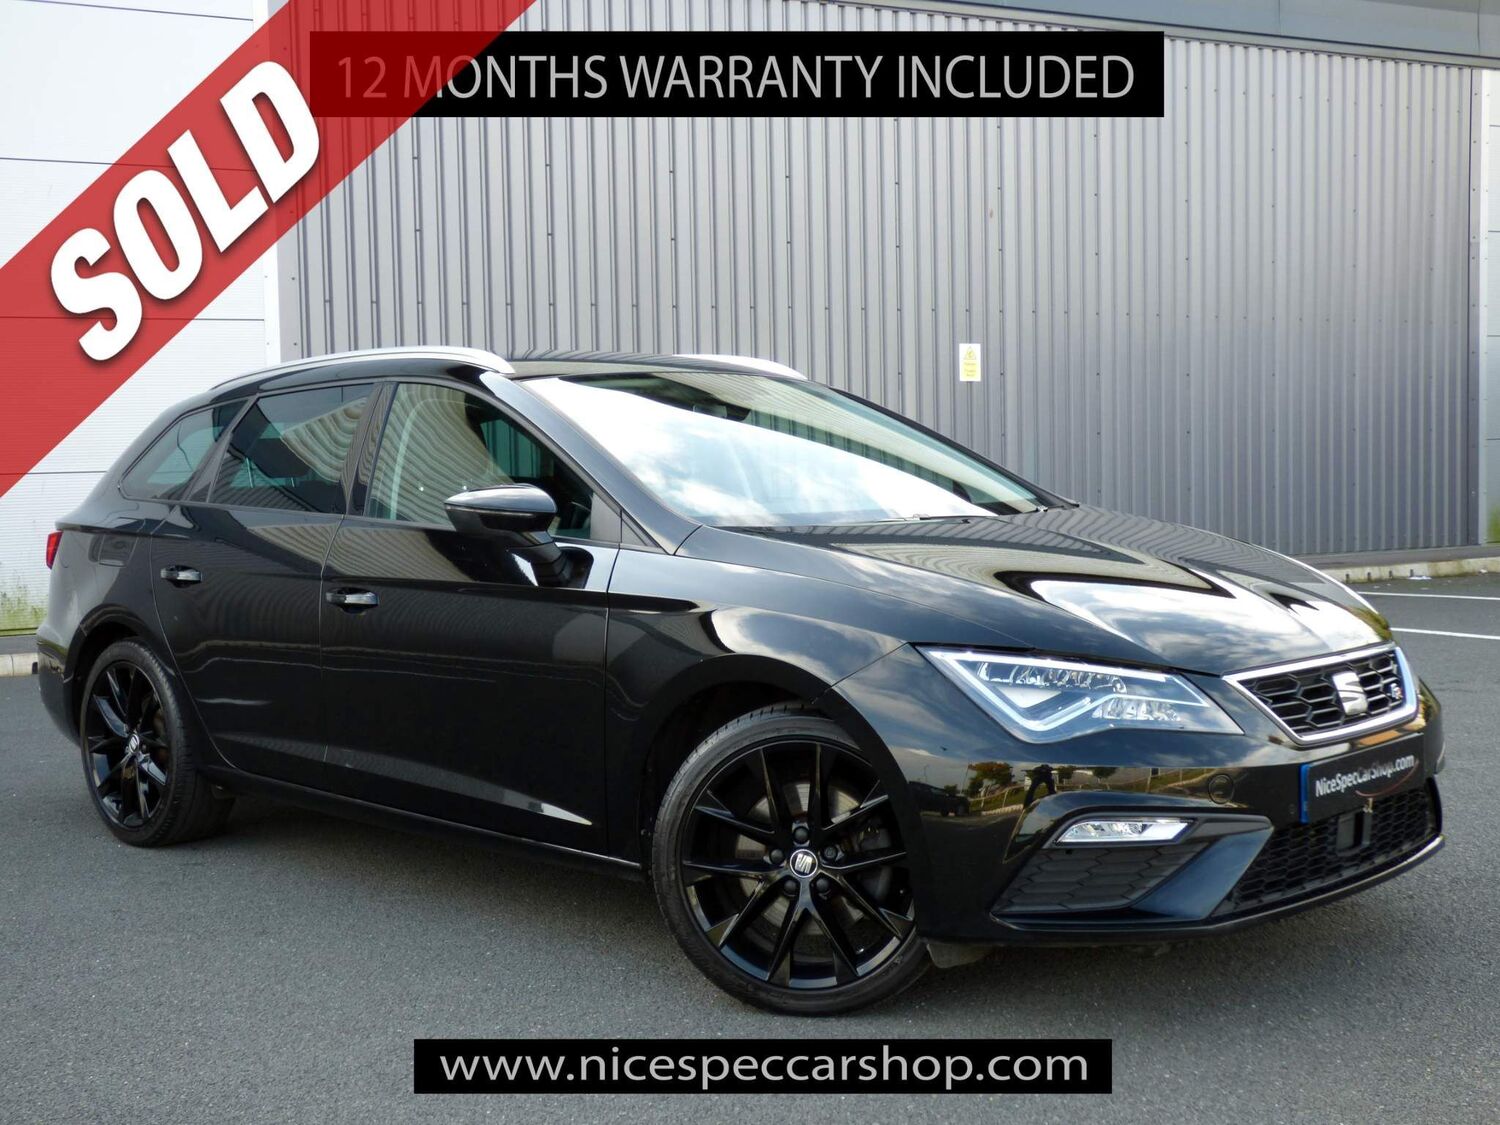 Used SEAT LEON in Ashby de la Zouch, Leicestershire